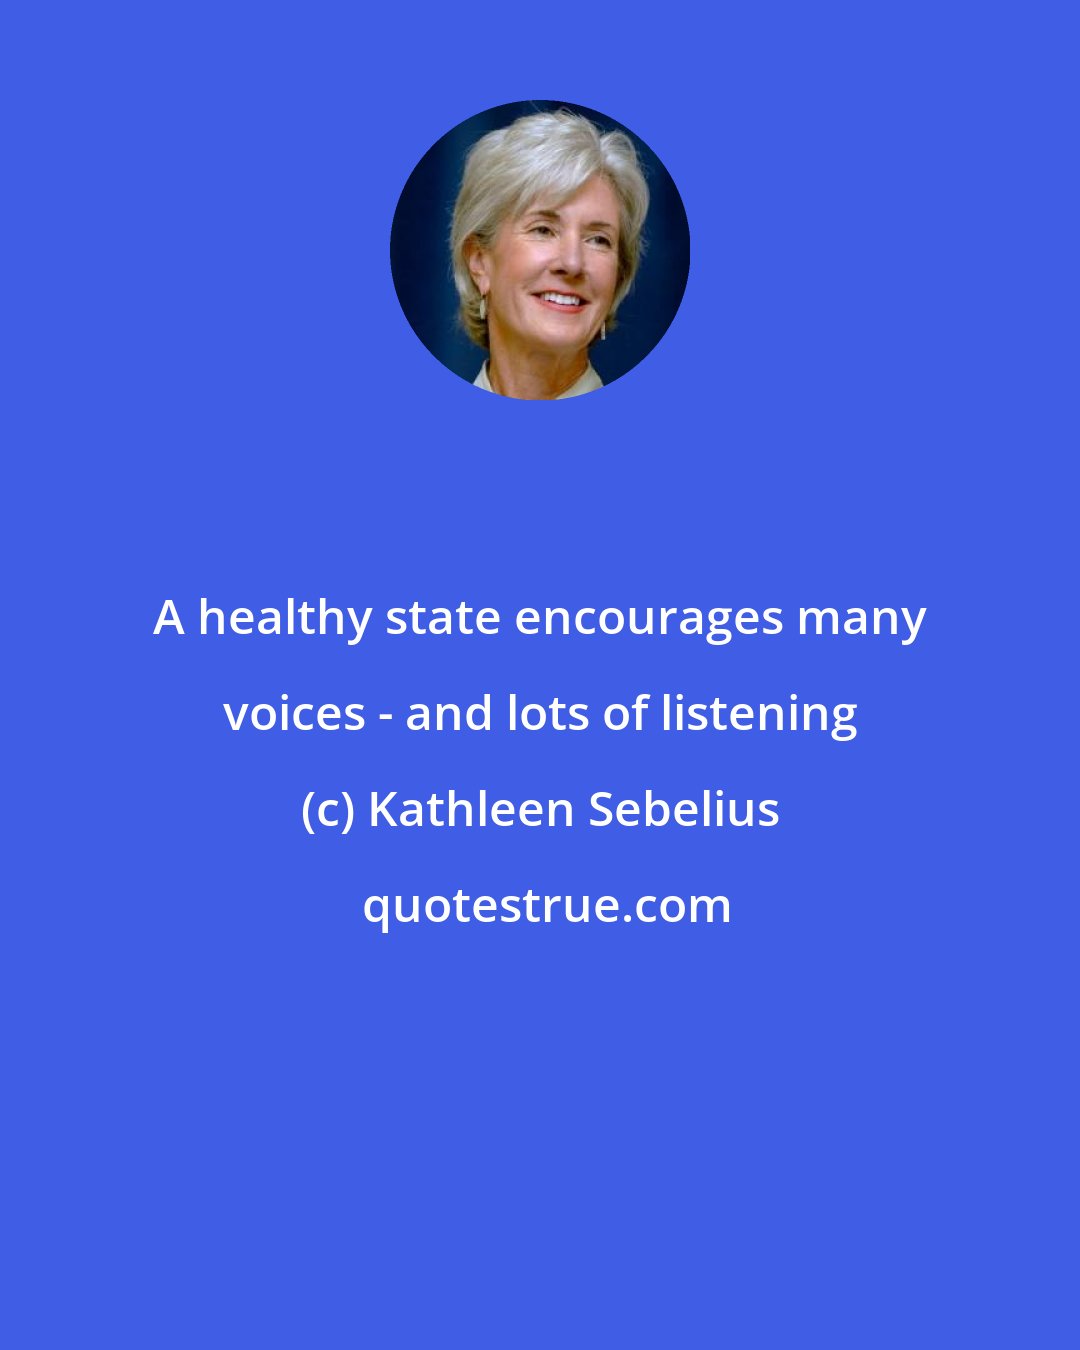 Kathleen Sebelius: A healthy state encourages many voices - and lots of listening